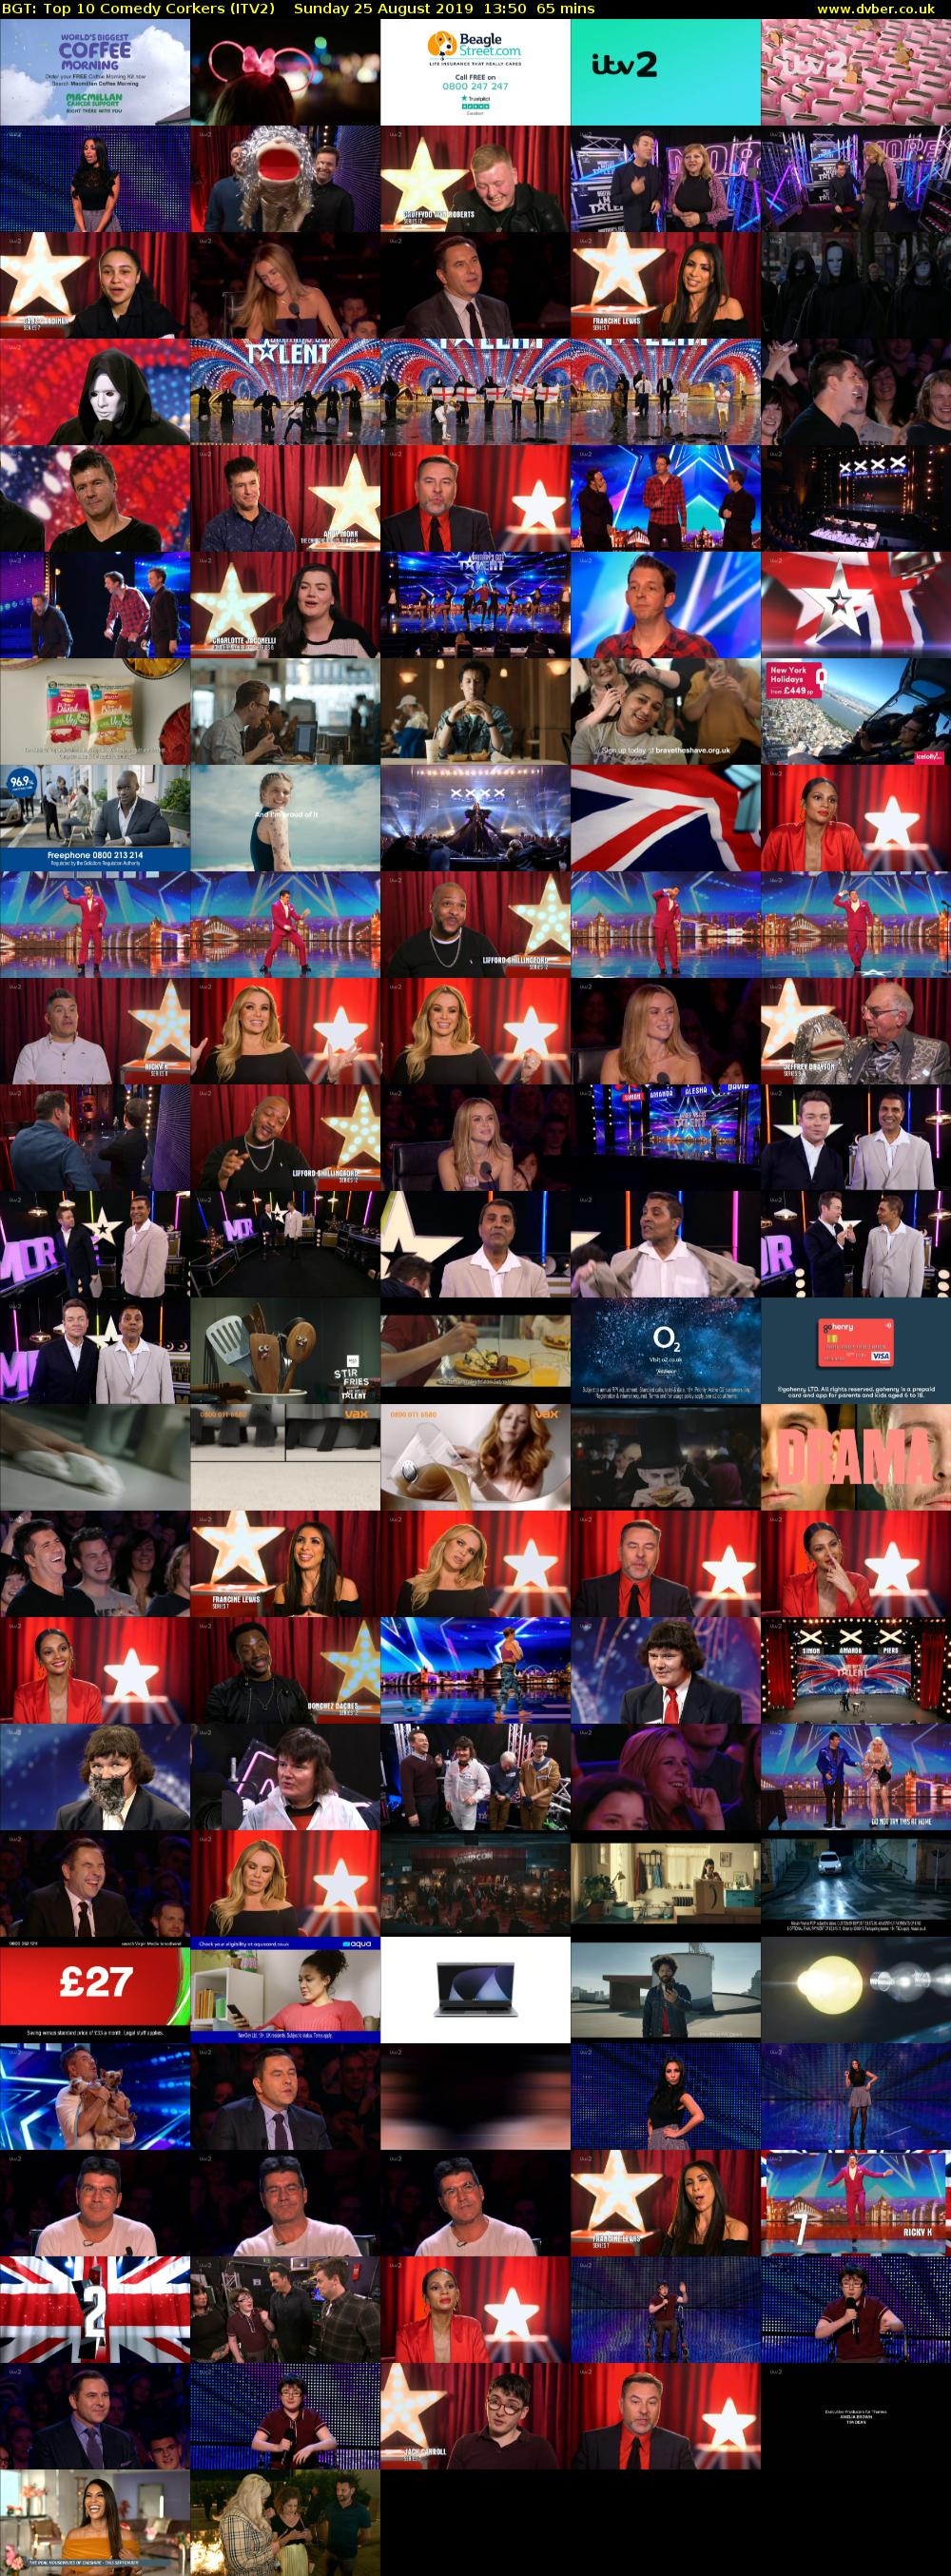 BGT: Top 10 Comedy Corkers (ITV2) Sunday 25 August 2019 13:50 - 14:55